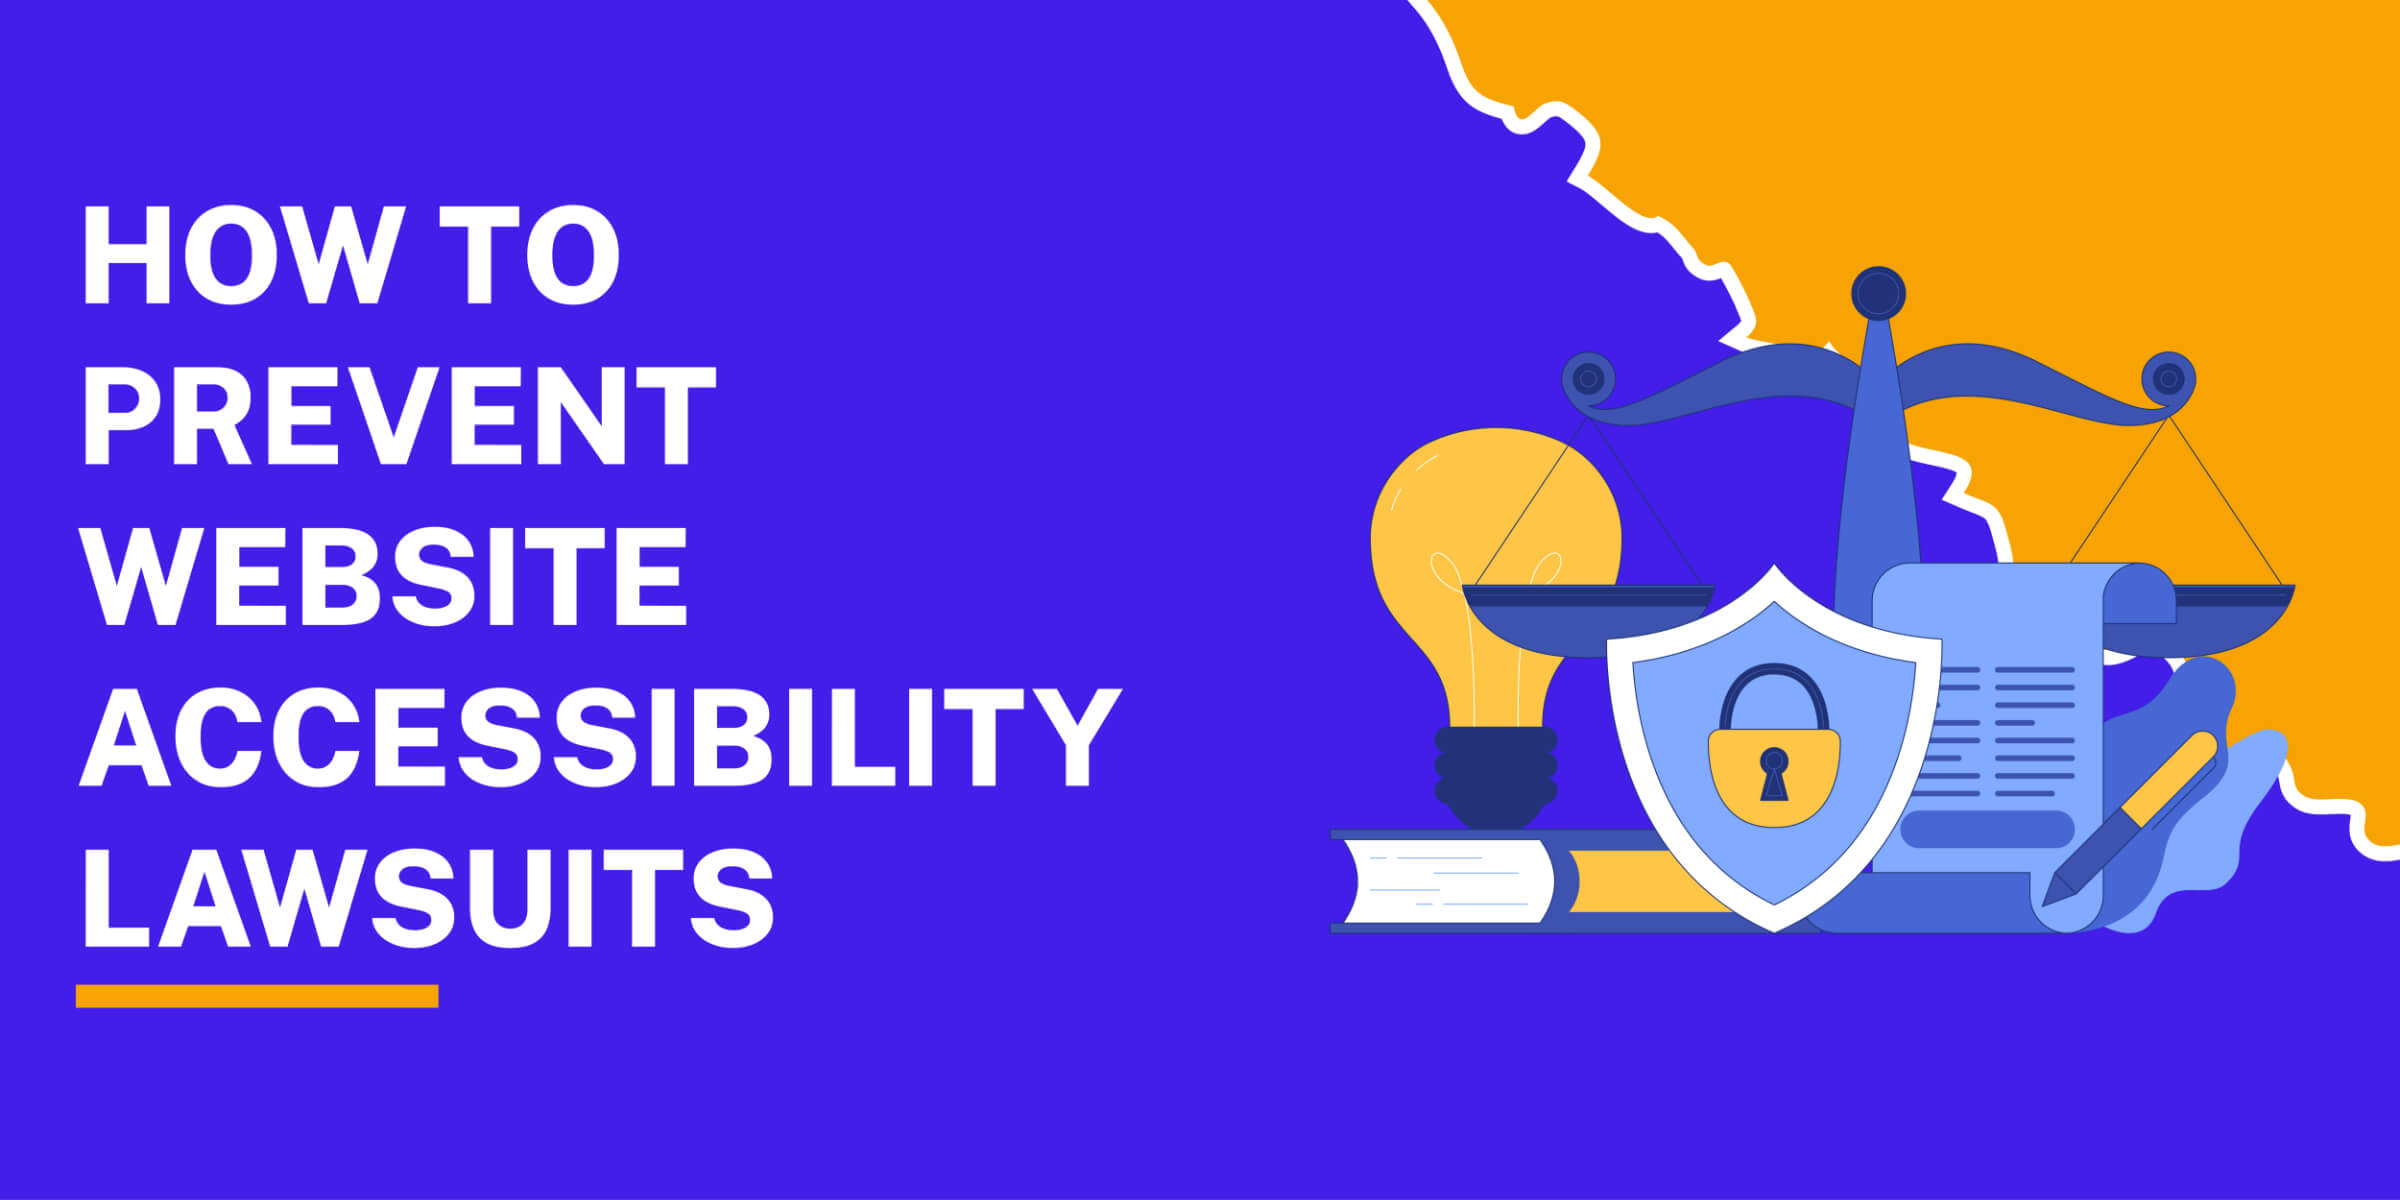 How to Prevent Website Accessibility Lawsuits